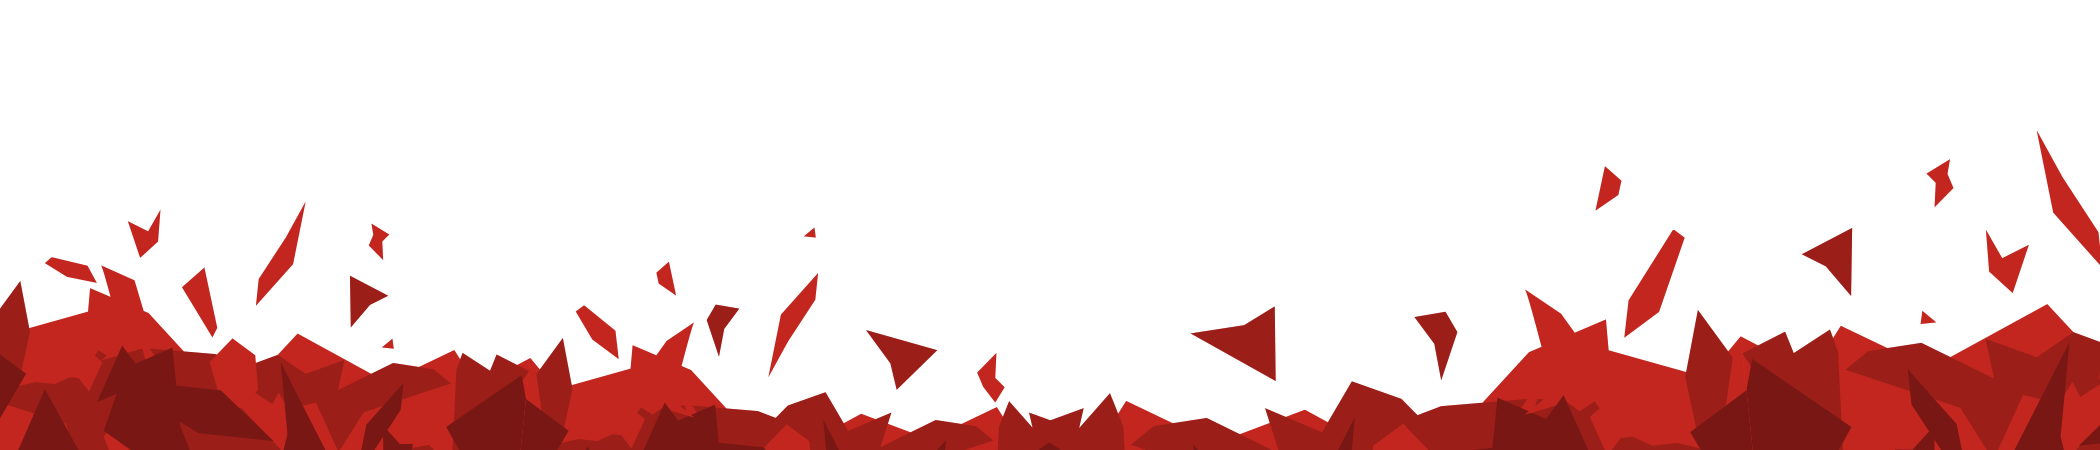 Join the wolfpack